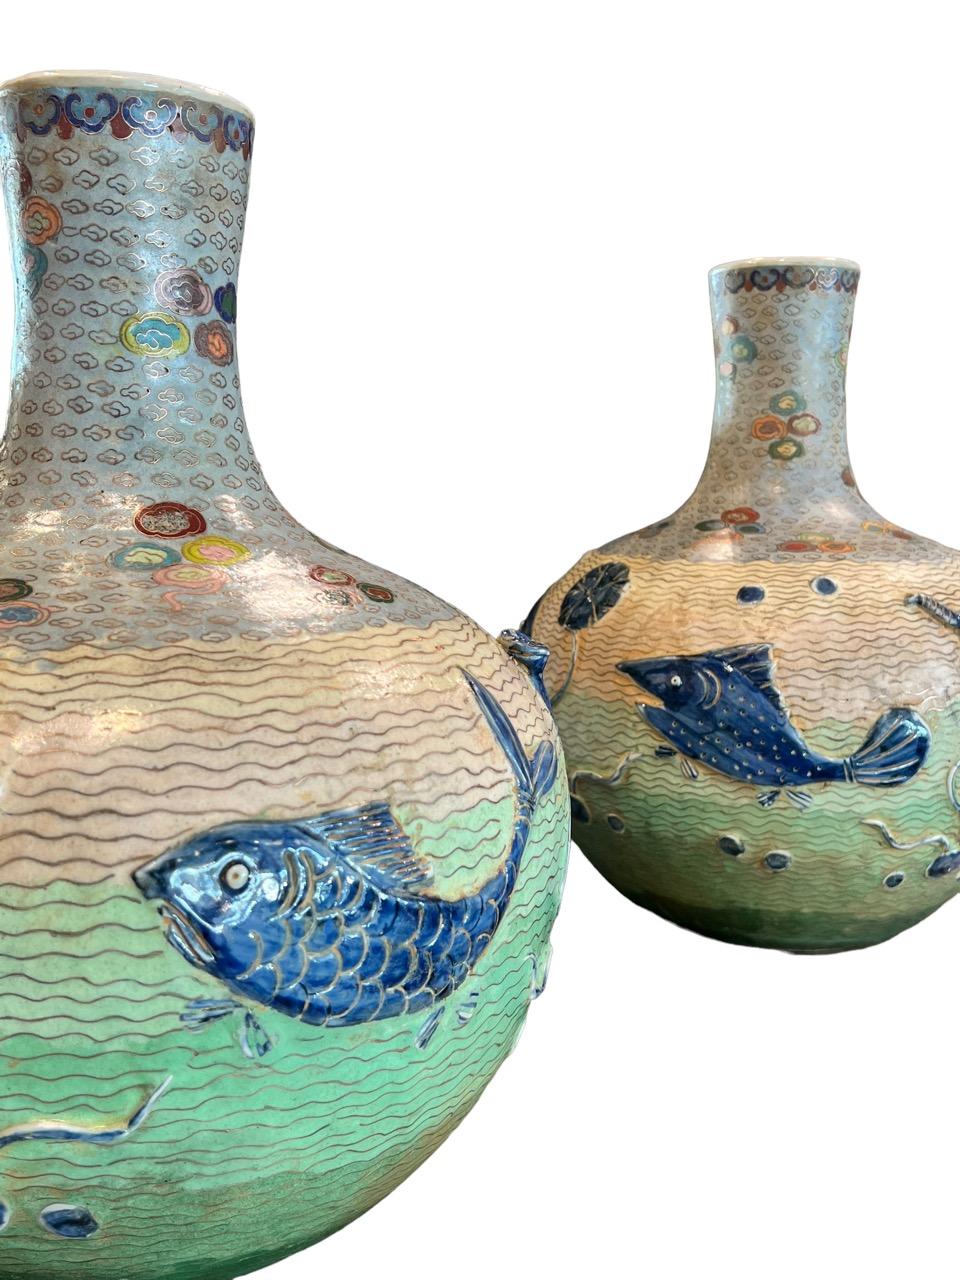 Pair of Early 20th Century '1900s' Chinese Cloisonné Enameled Porcelain Vases For Sale 11